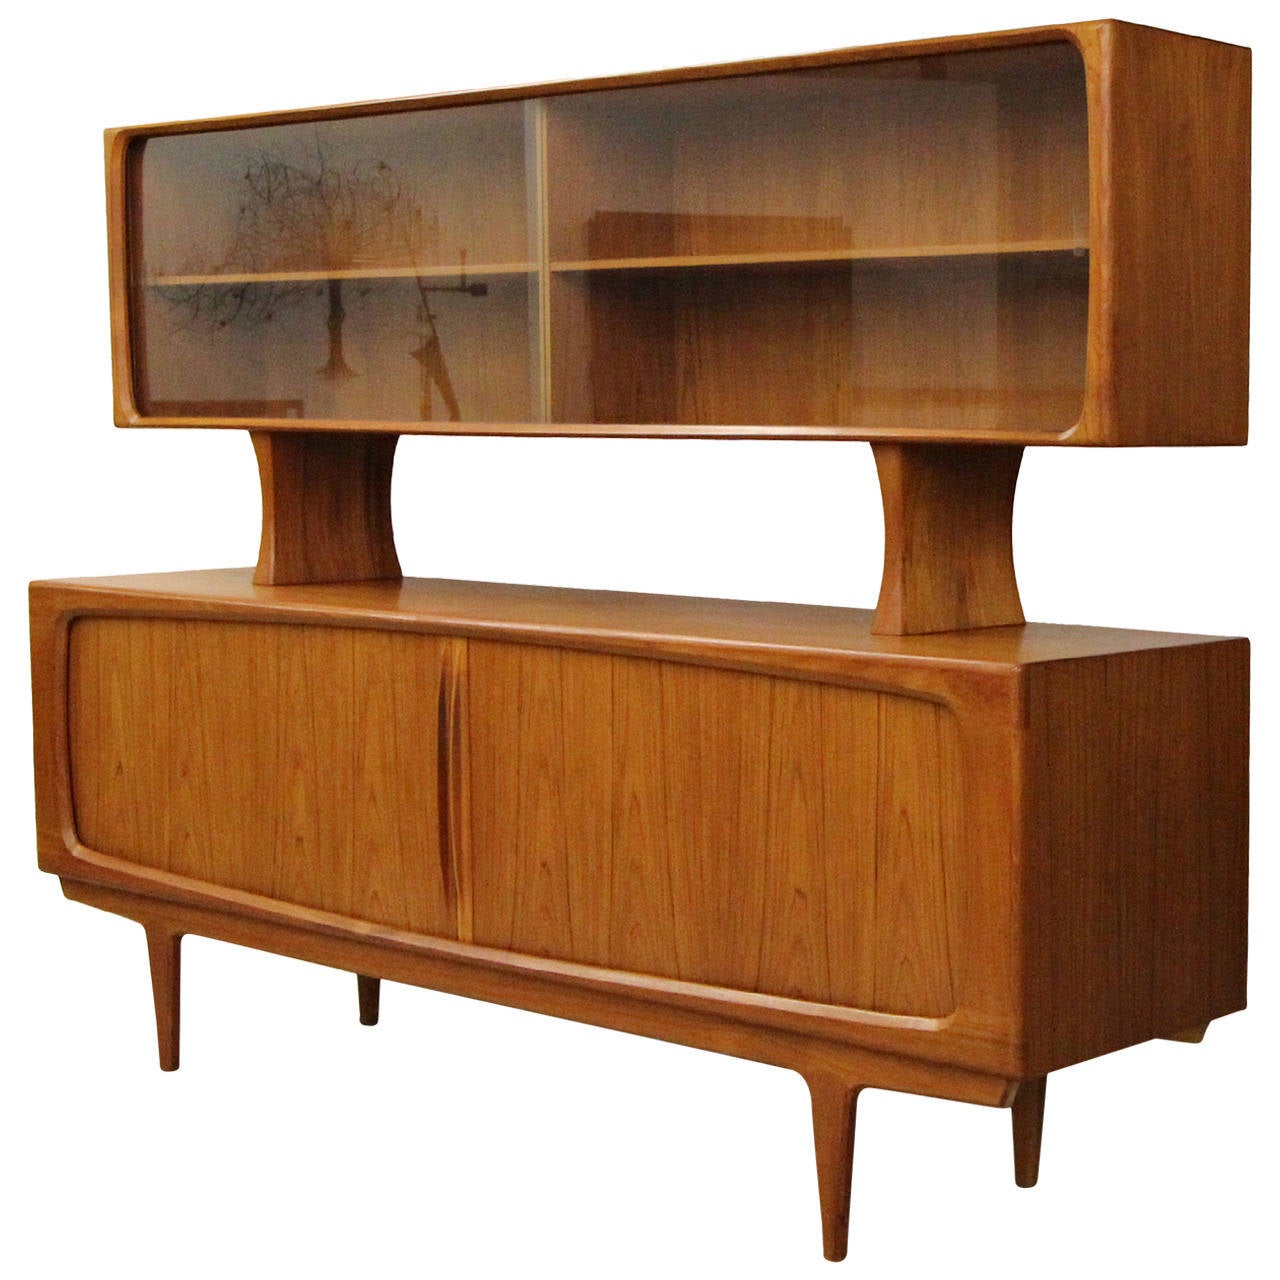 Gorgeous Danish Teak Duo, Credenza with removable hutch, designed by Bernhard Pedersen & Son.  This set, is high end, well made Danish.  Not a detail spared.  Seamless tambour doors, ample interior storage and details. 

Will sell separately,